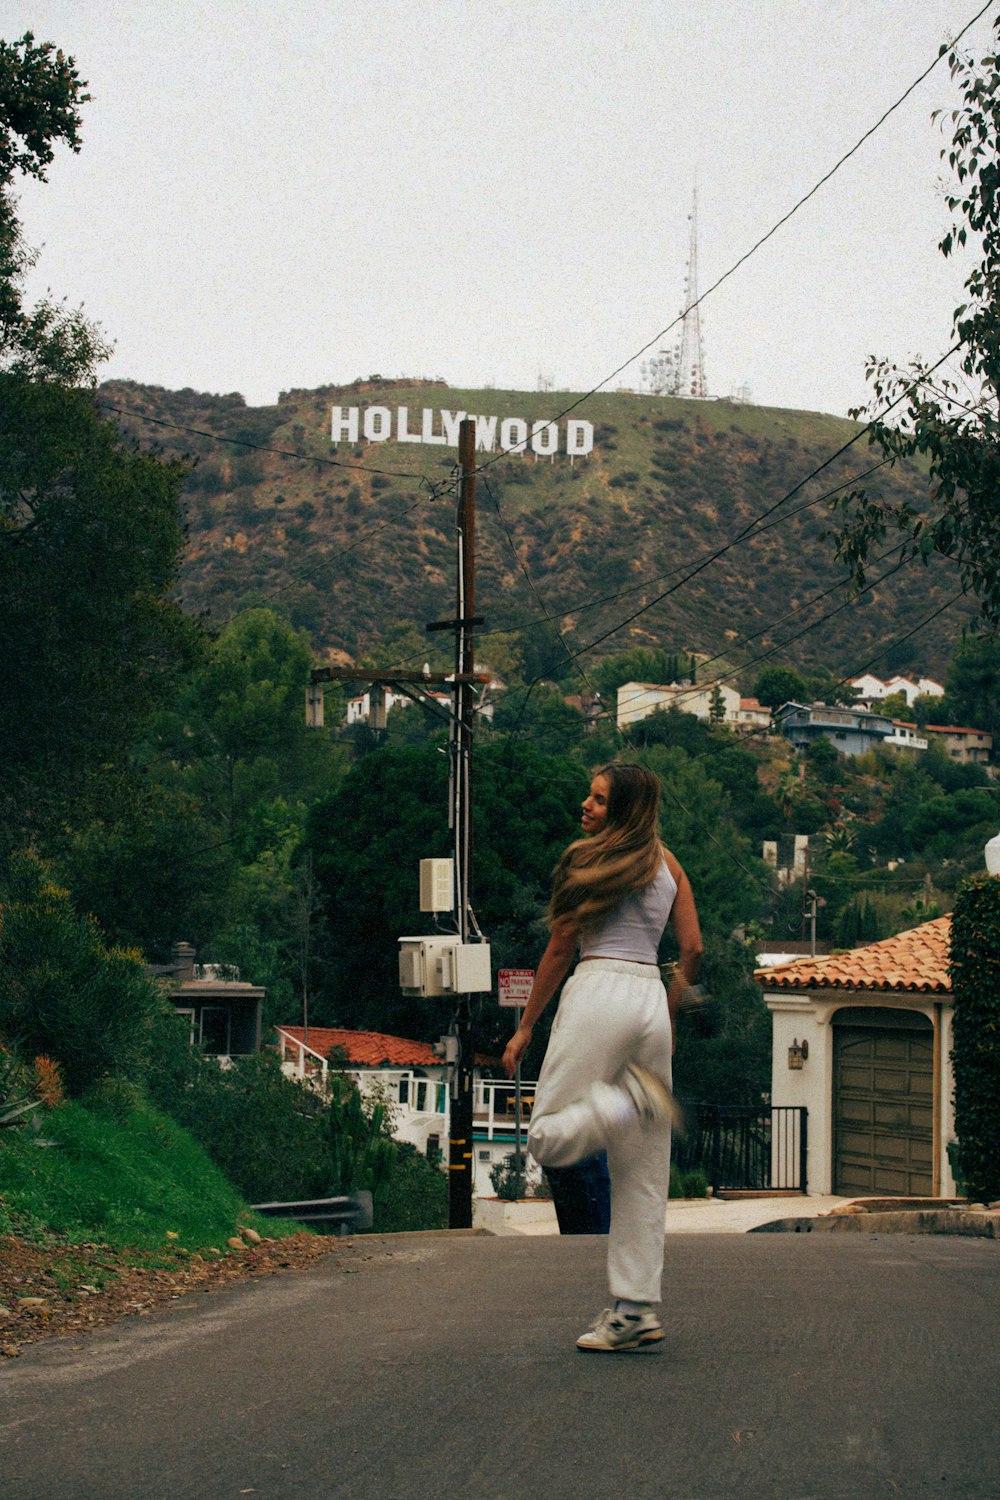 a woman walking down a street in front of a hollywood sign